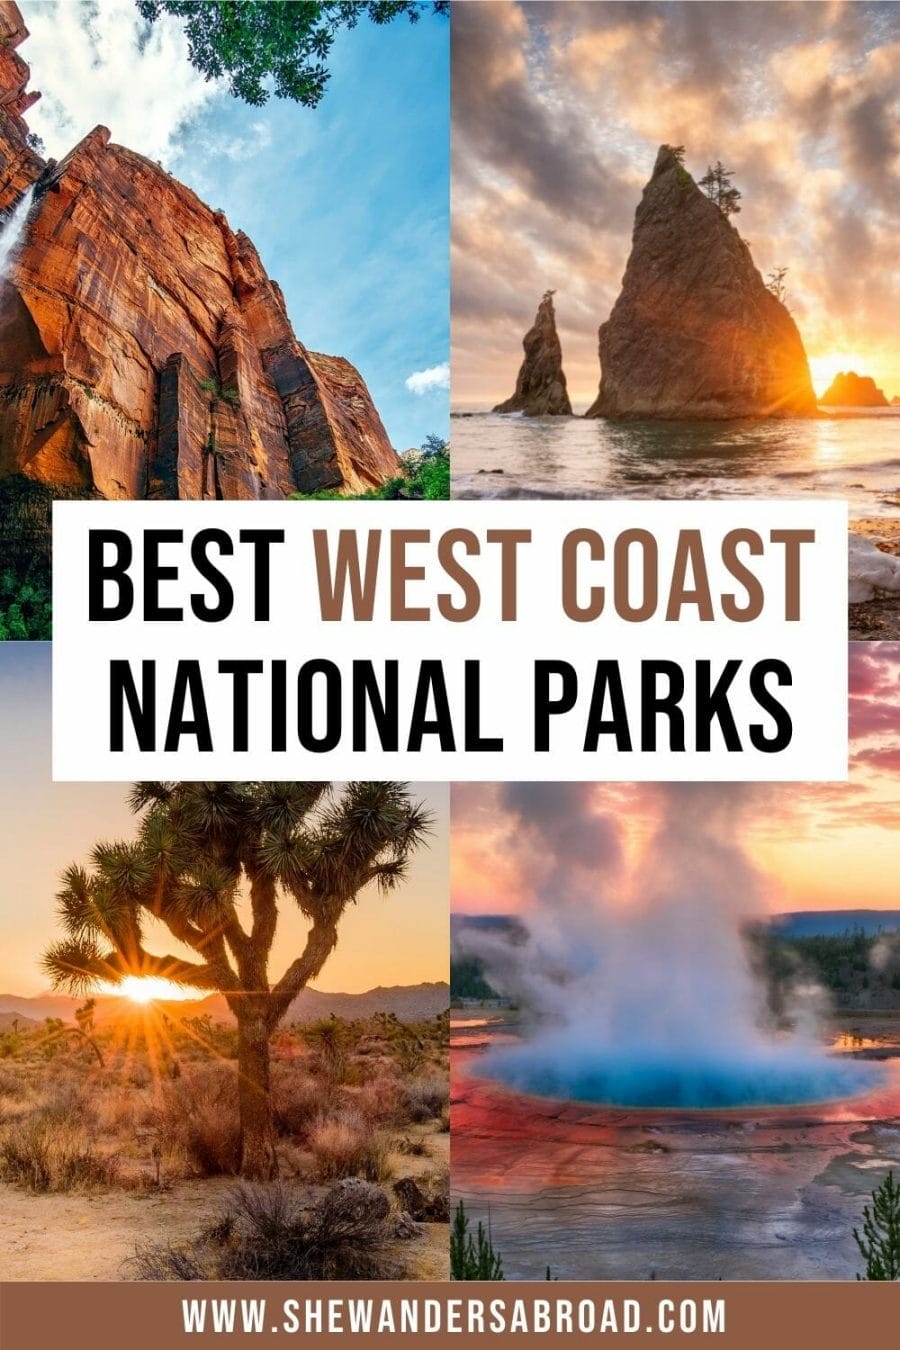 25 Amazing West Coast National Parks You Can't Miss